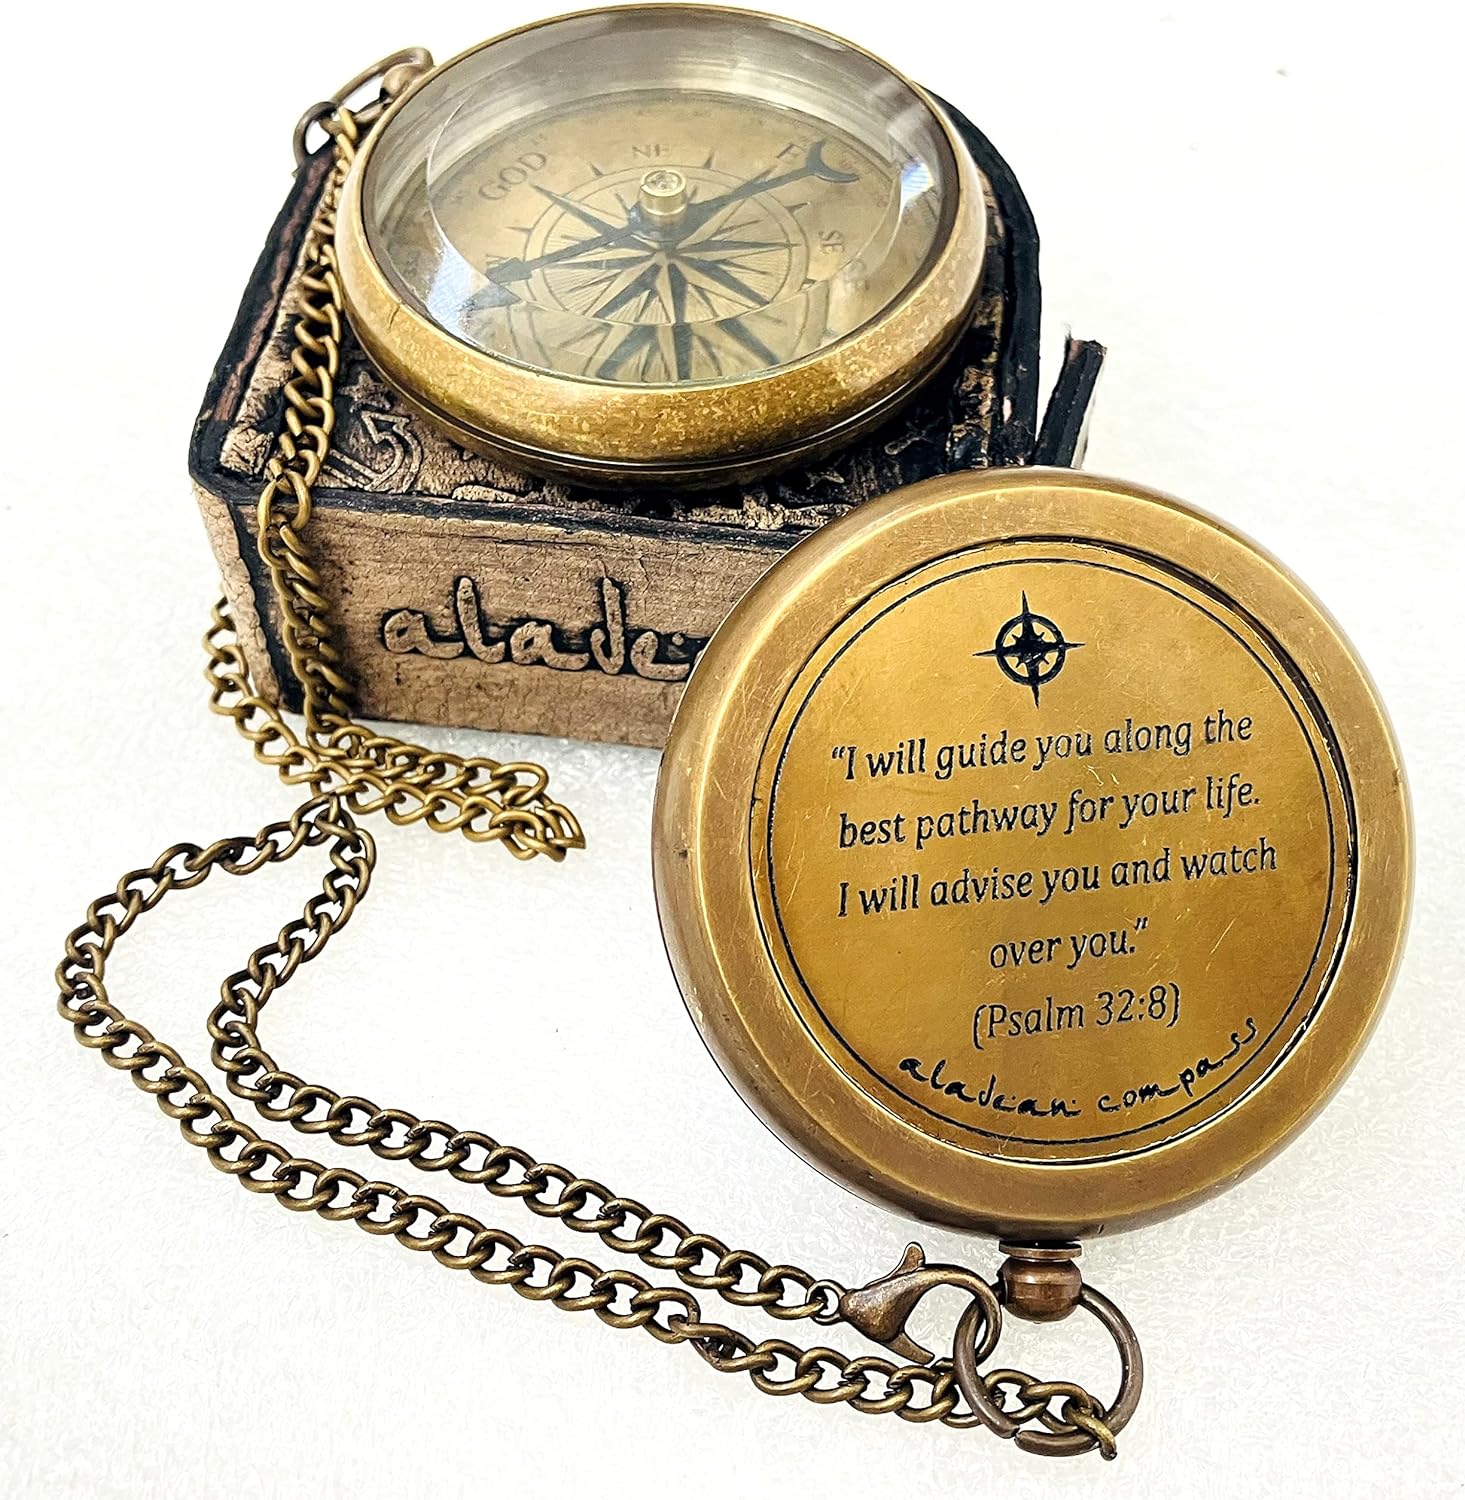 God' Providence Compass for Best Pathway - Holy Communion Gifts Boys, Inspirational Graduation Gifts, Christian Baptism Gifts, Religious Gifts for Him/Her